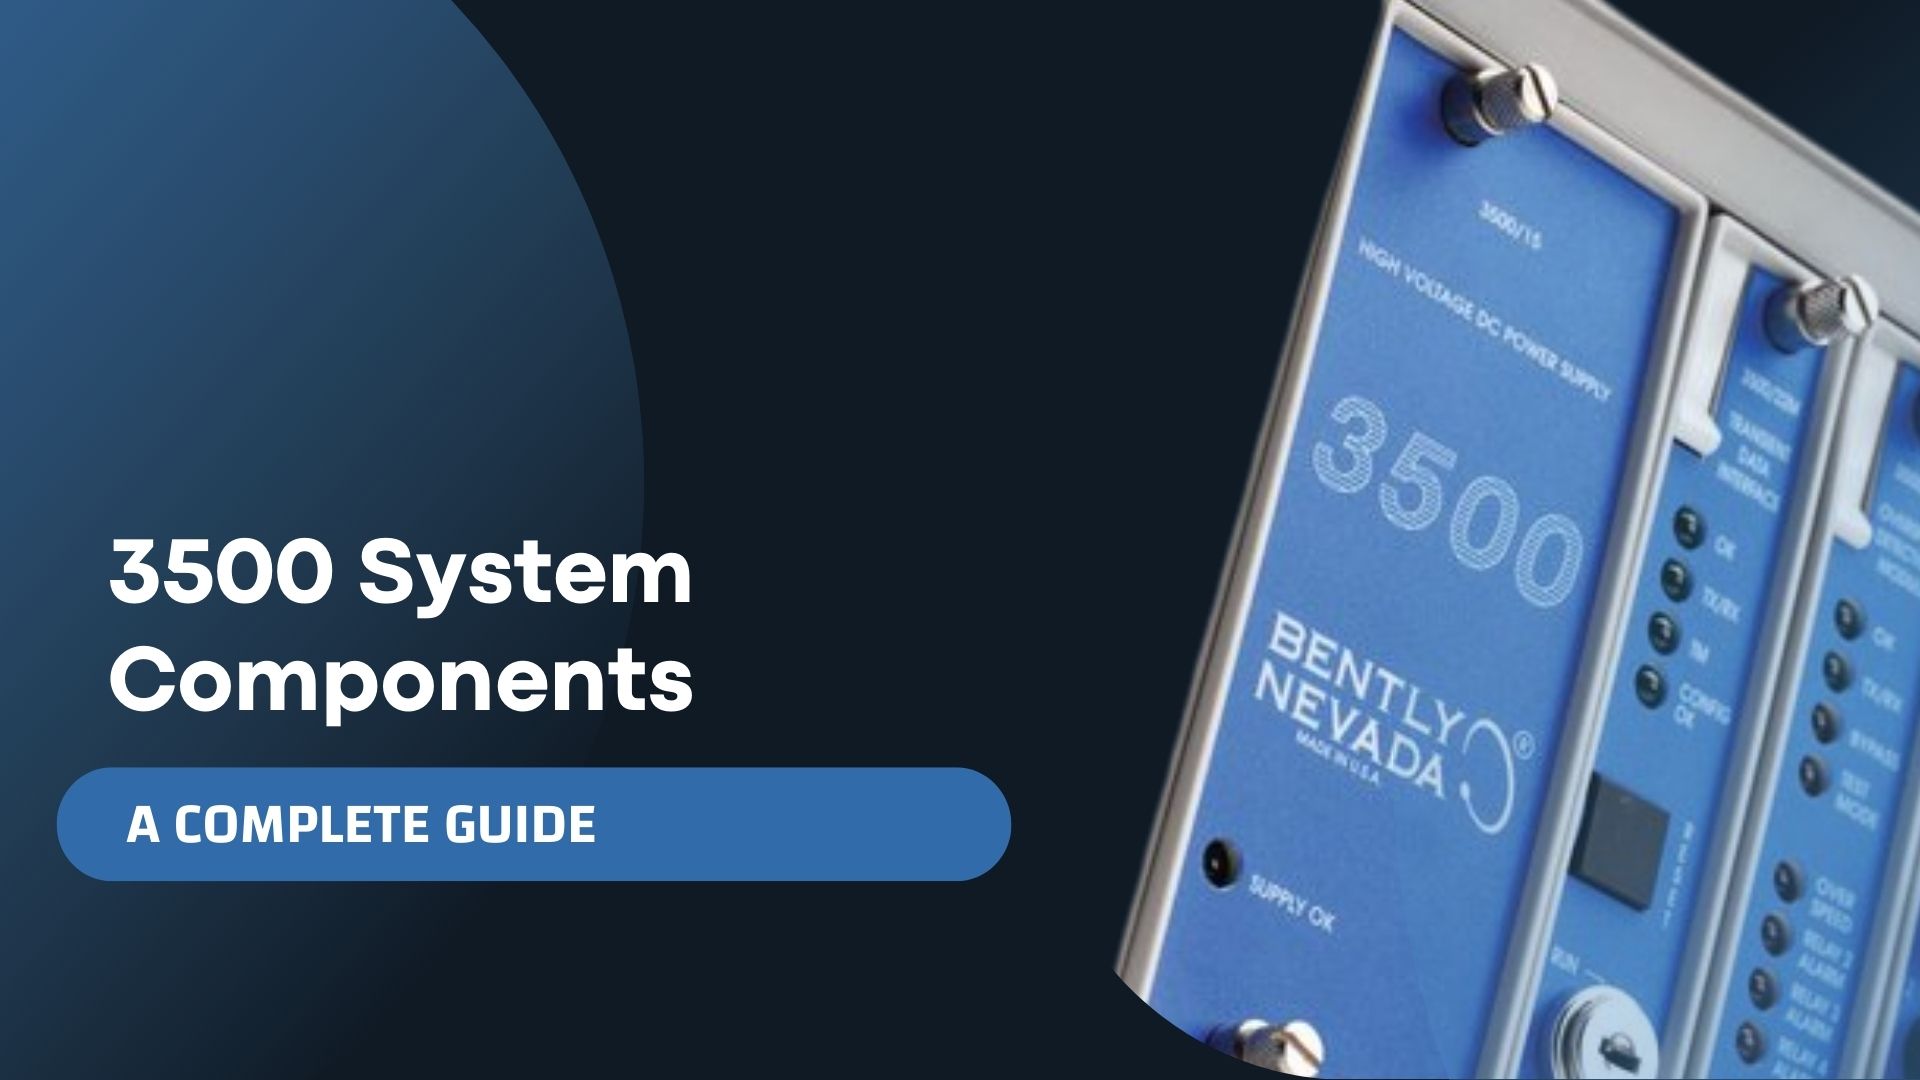 A Complete Guide on Bently Nevada 3500 System Components